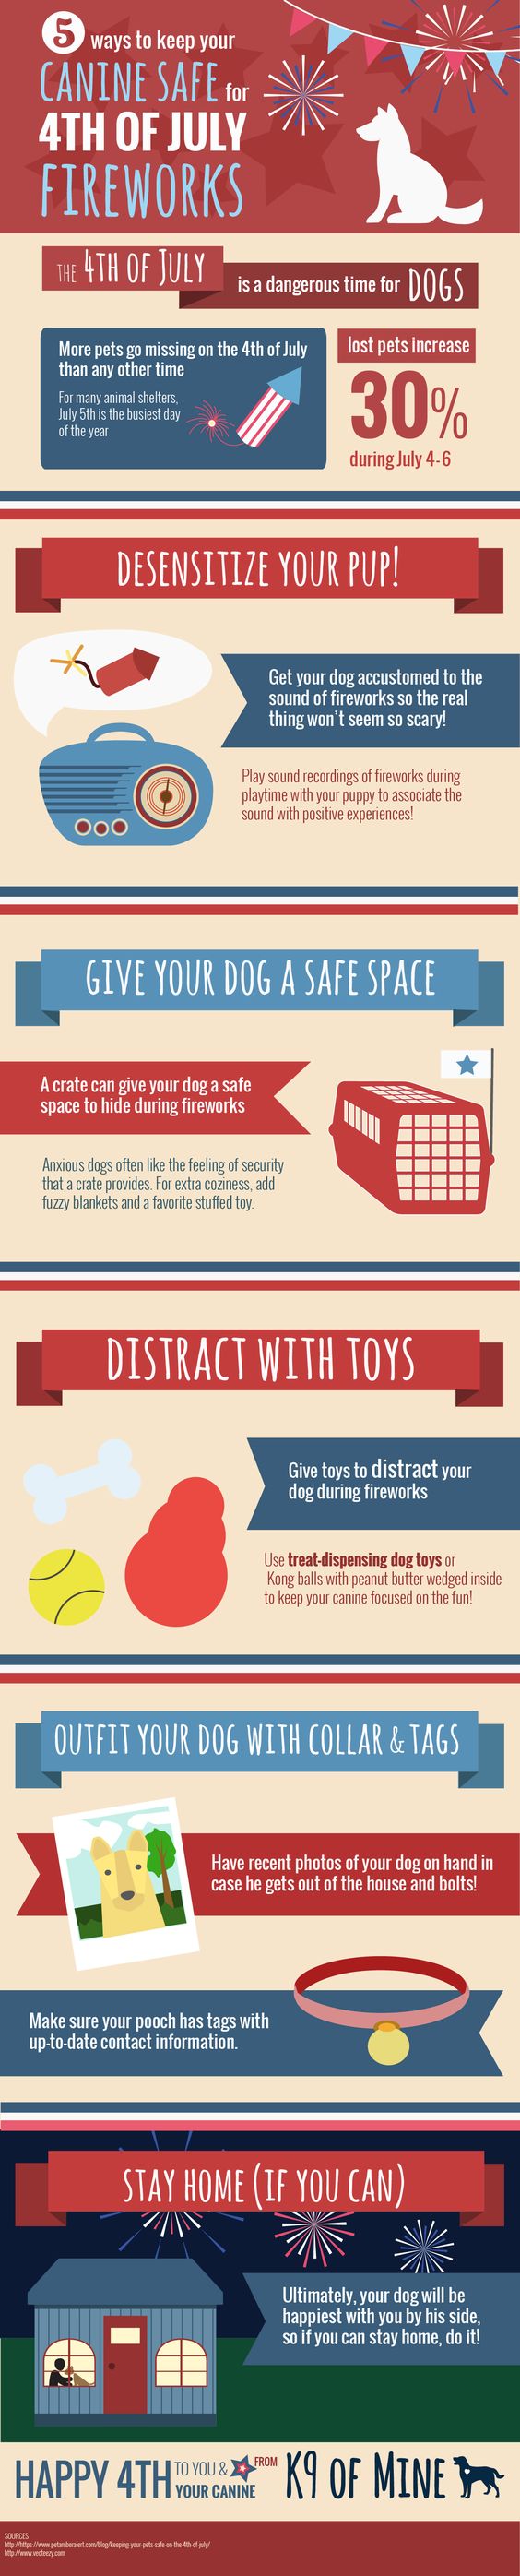 How to Keep Your Canine Safe for 4th of July Fireworks [Infographic] #dogs #4thOfJuly